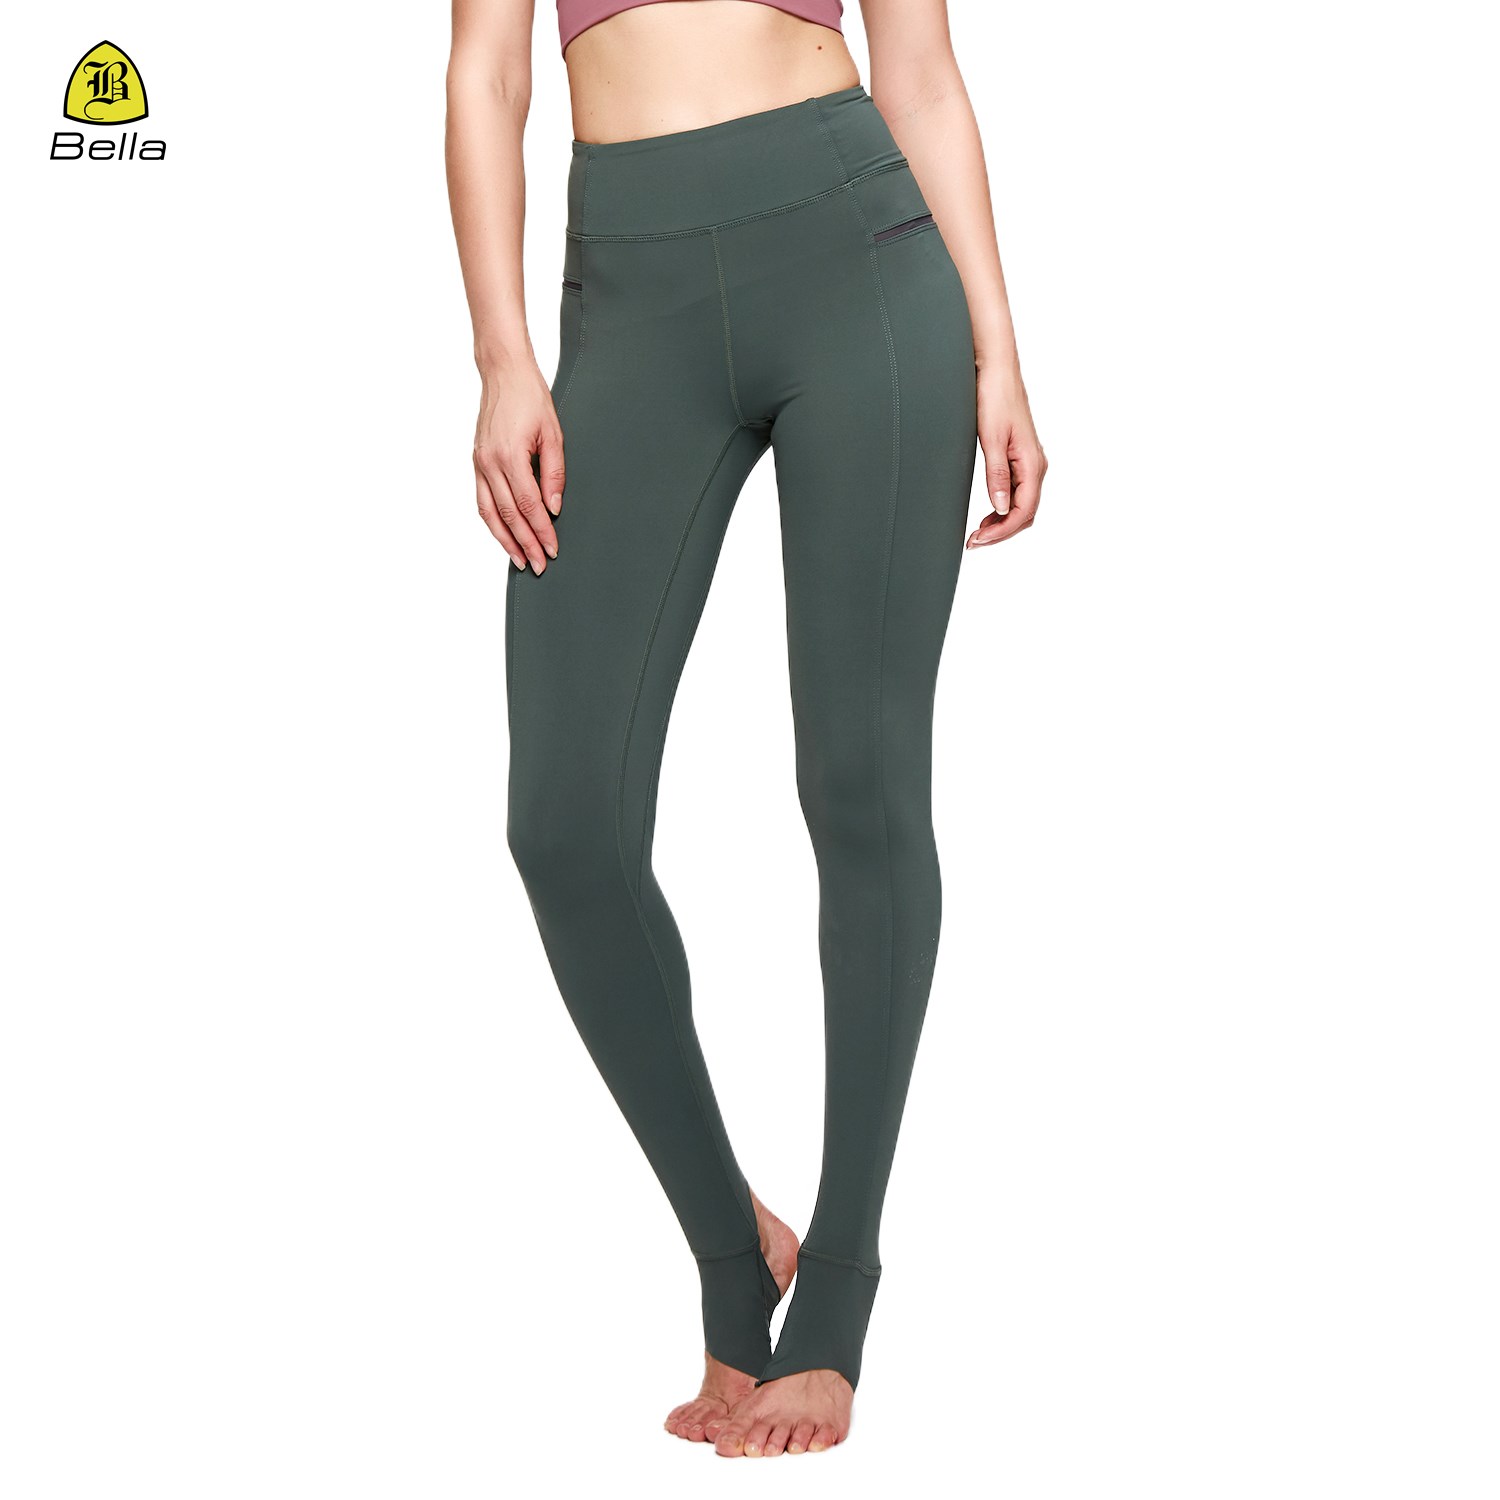 Slim-Fit-Fitness-Yoga-Leggings mit hoher Taille